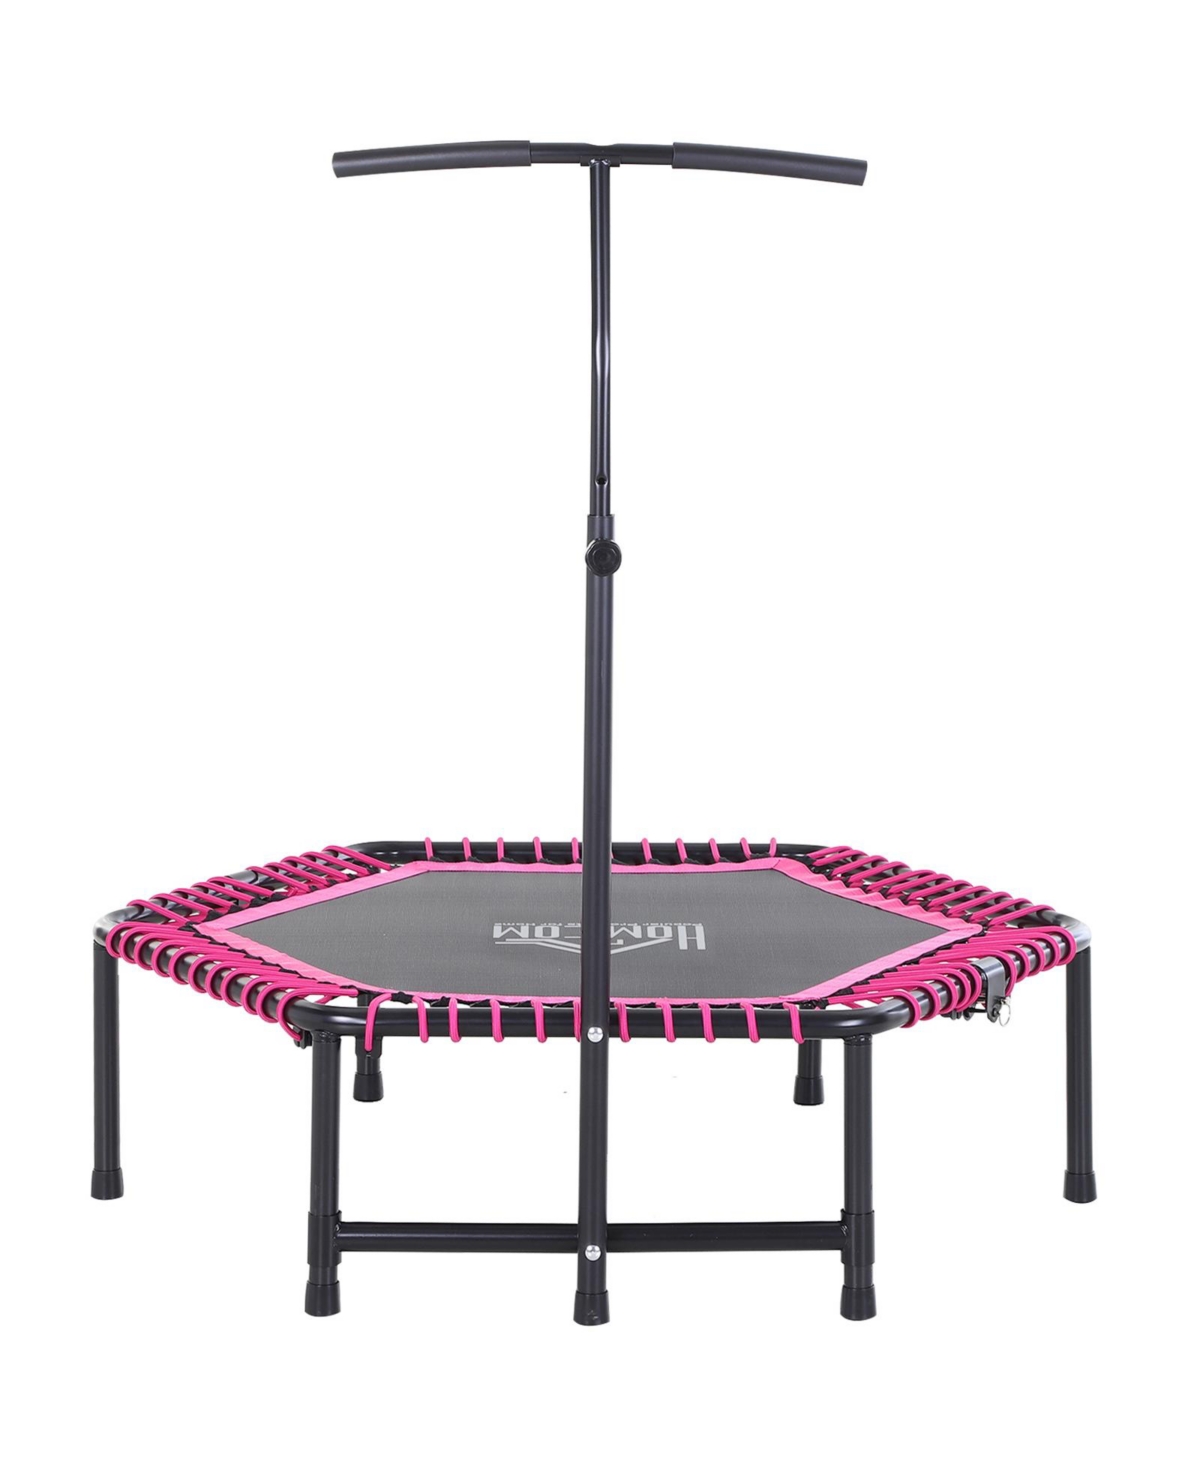 48" Foldable Adjustable Trampoline Bungee Exercise Fitness Trainer - Pink